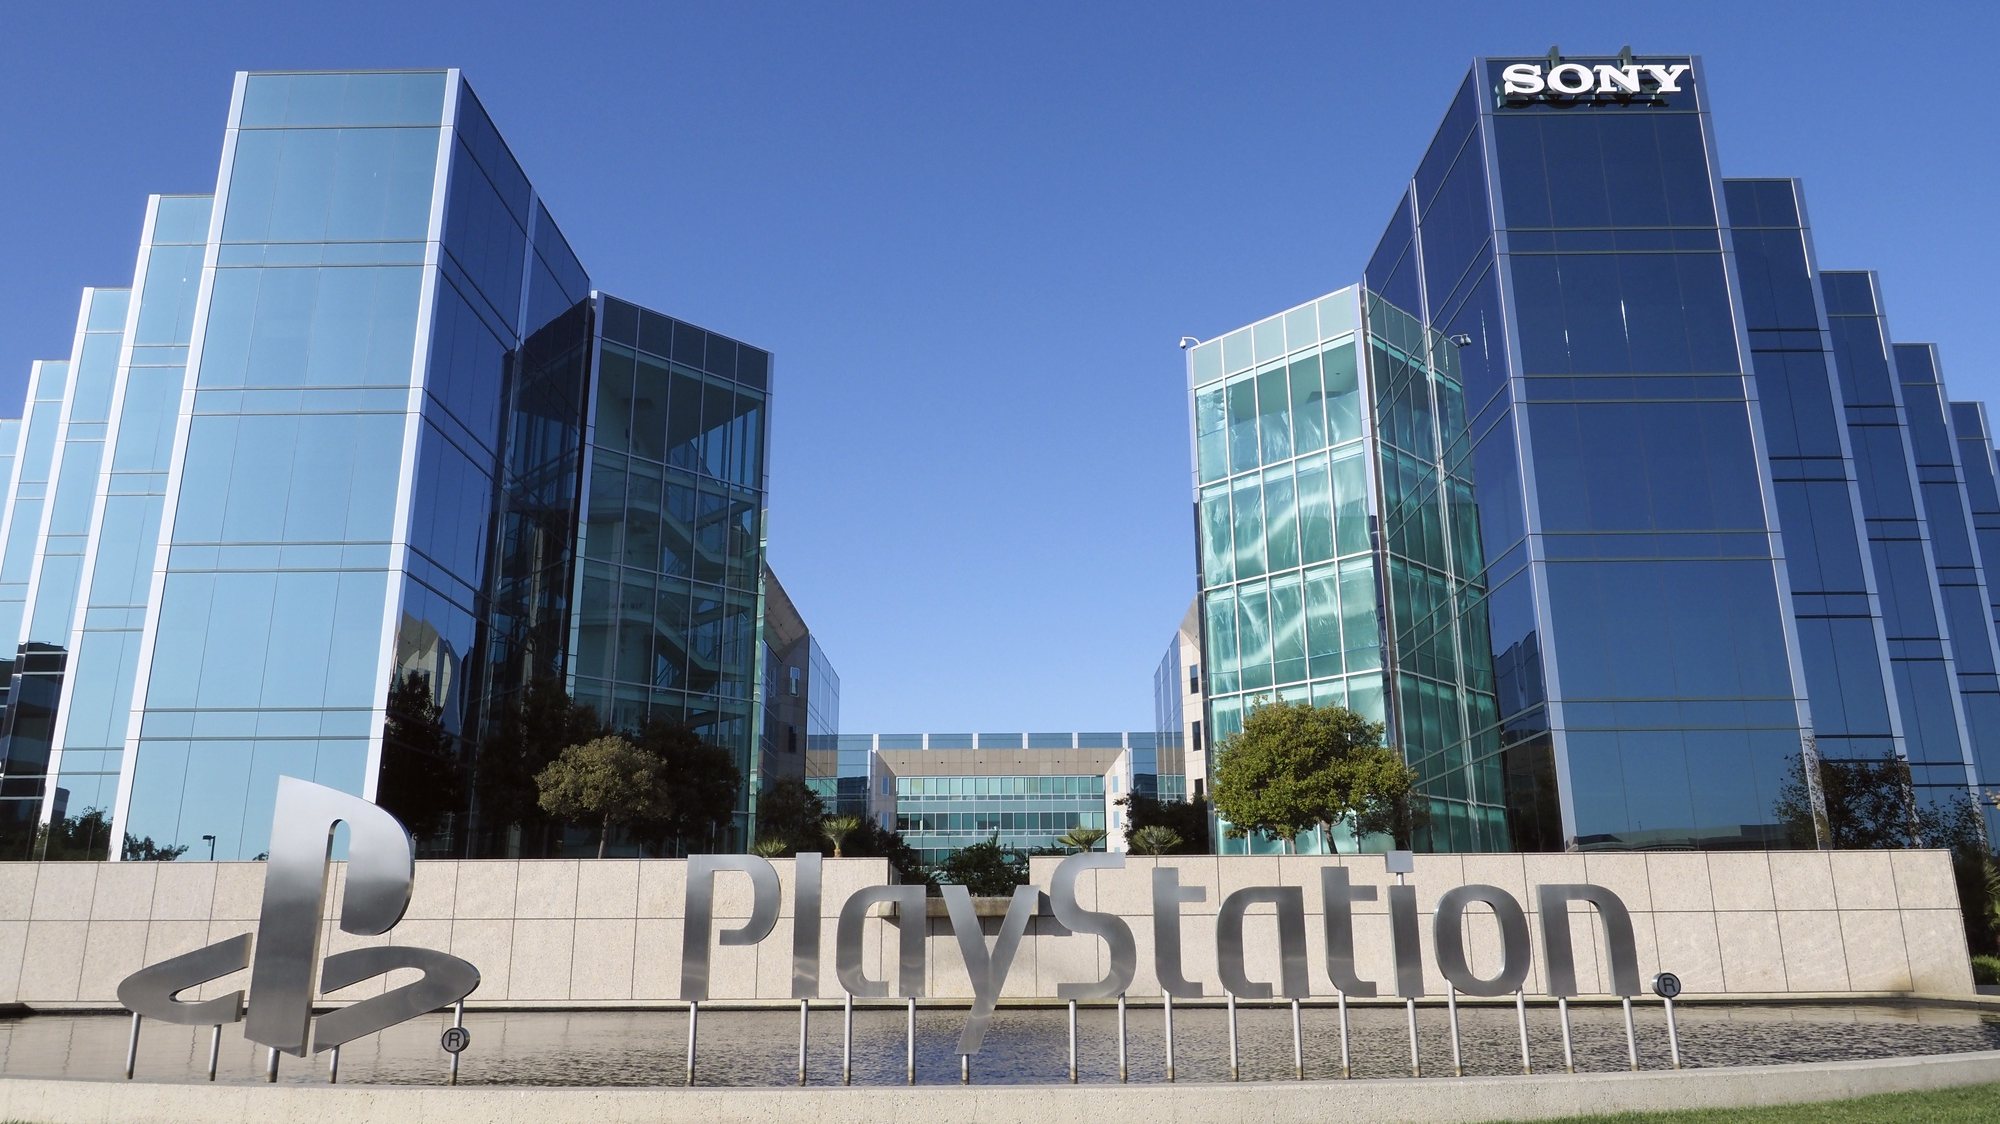 epa07919315 View of a Sony PlayStation logo outside the Sony Interactive Entertainment (SIE) US Headquarter in San Mateo, California, USA, 13 October 2019. Sony announced its next-generation console will be called PlayStation 5 (PS5) and will be launching around holiday season 2020. According to reports, the new PS5 will feature a solid-state drive (SSD) for faster load times and better performance, support for 8K Ultra HD visuals and a brand new power-saving mode.  EPA/JOHN G. MABANGLO